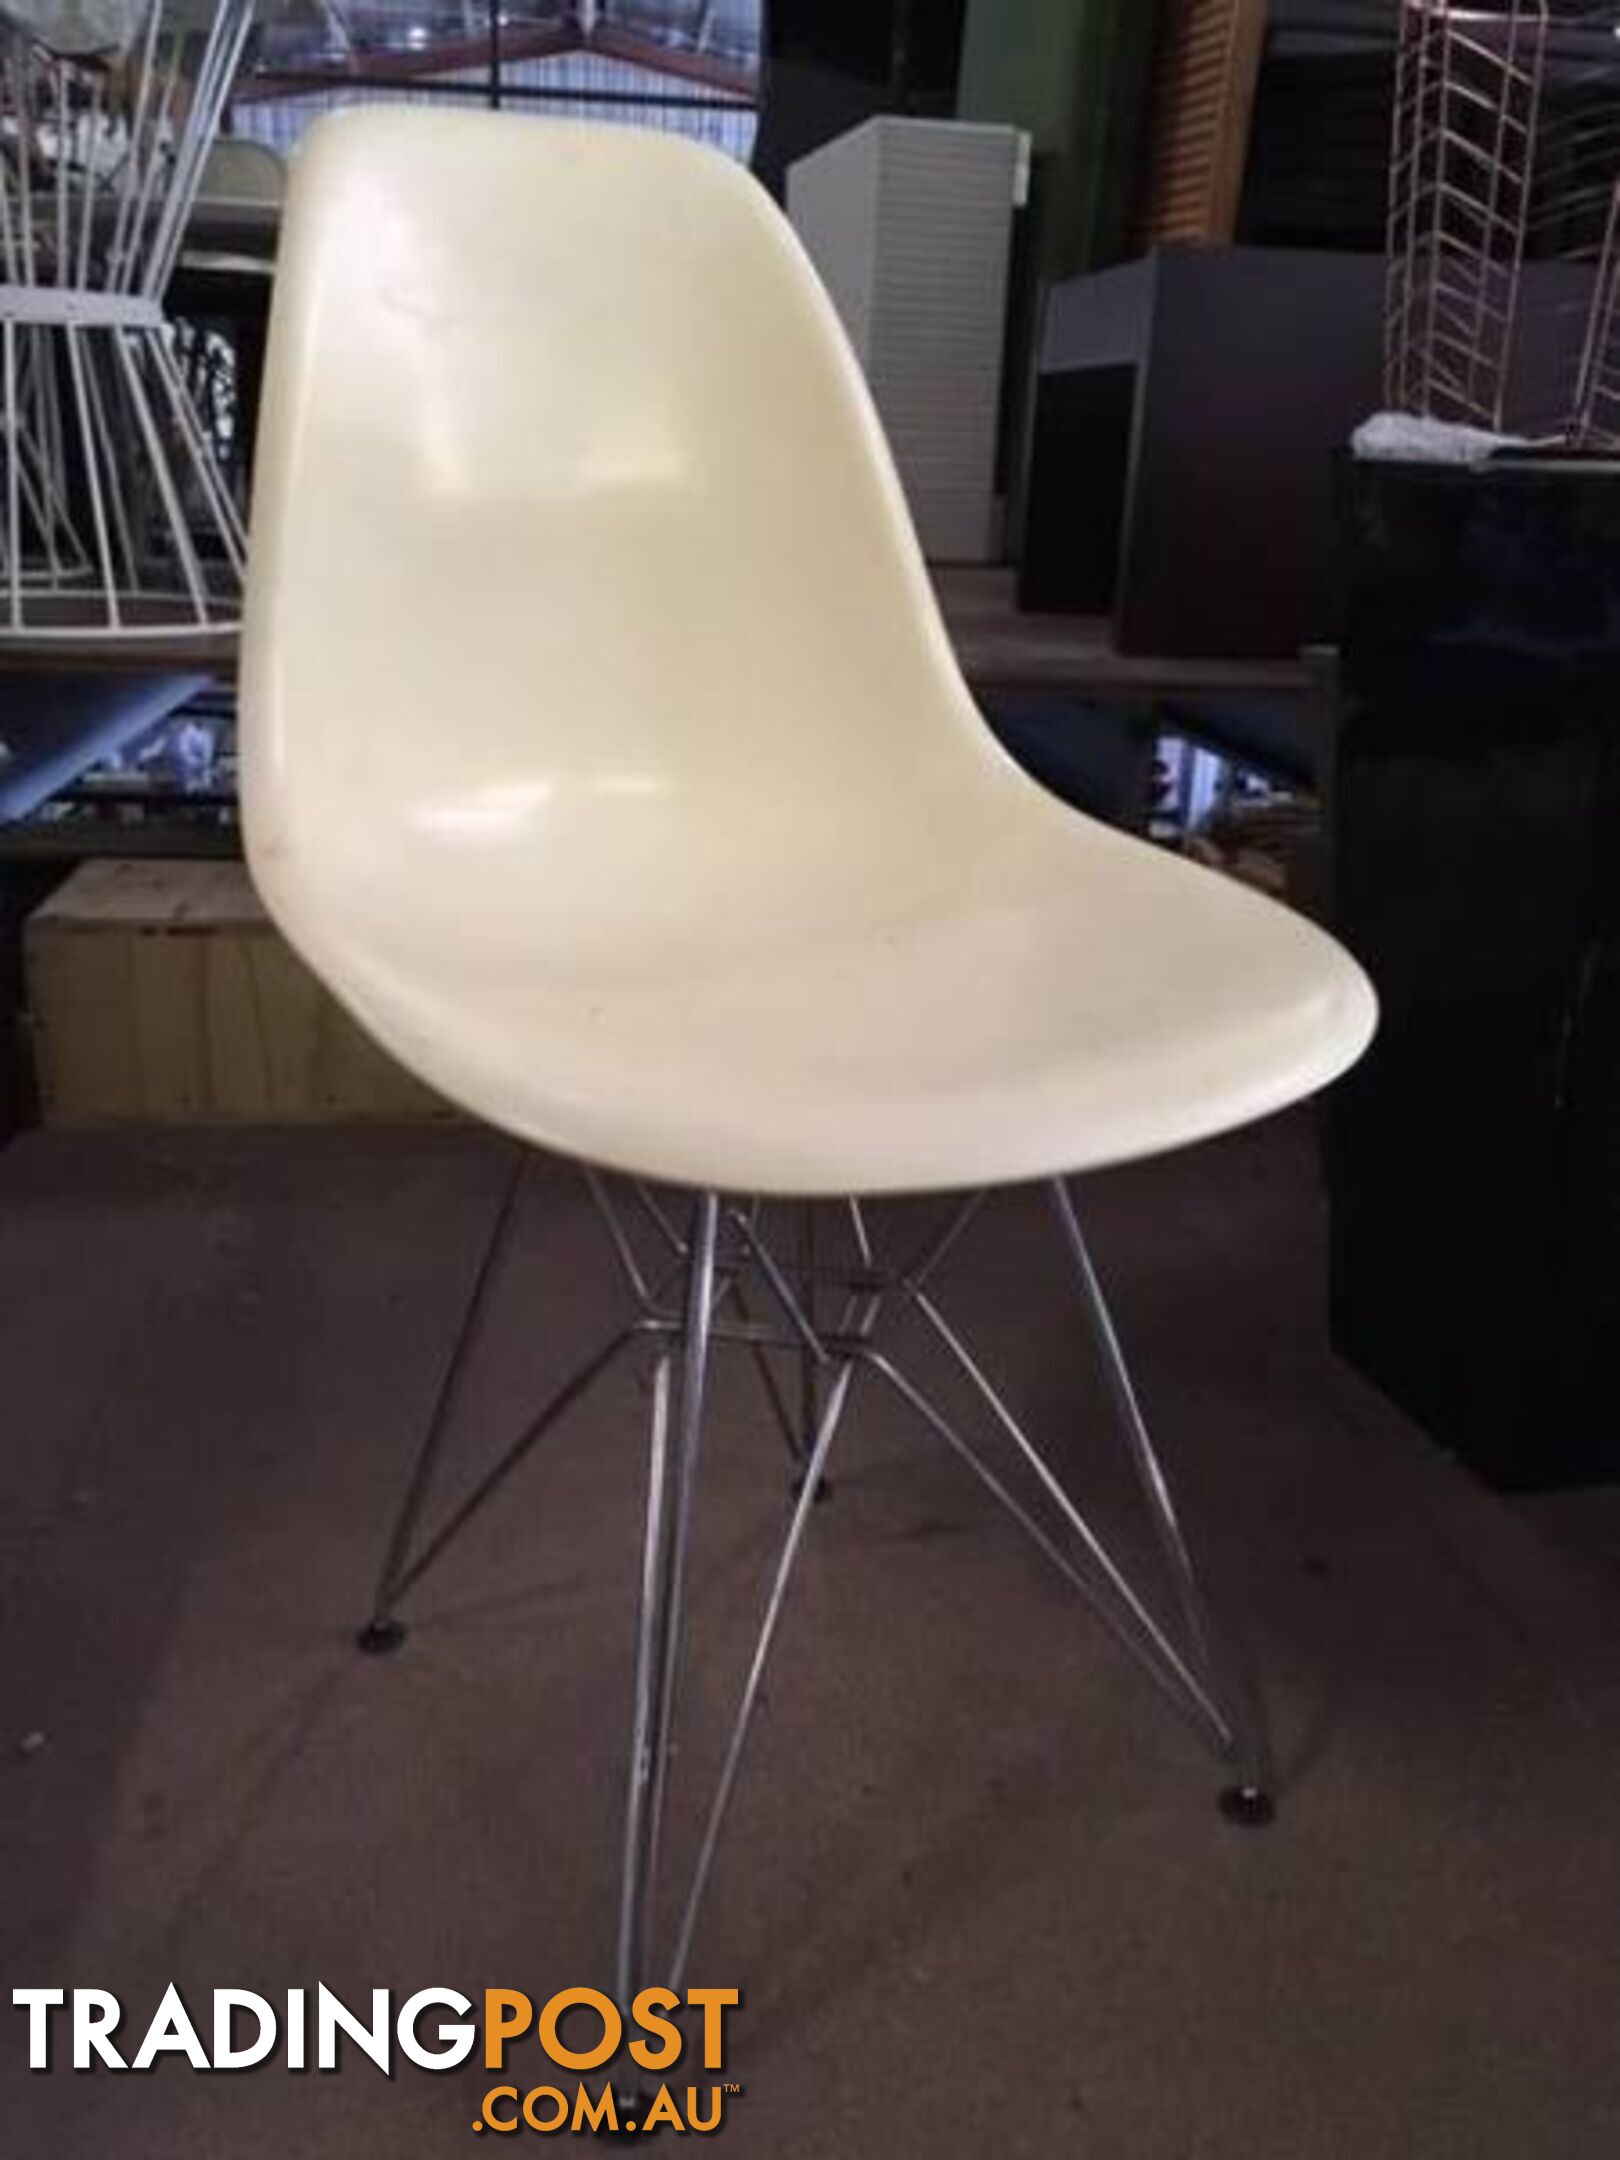 Replicia Charles Eames DSR Eiffel Dining Chair with Chrome Legs